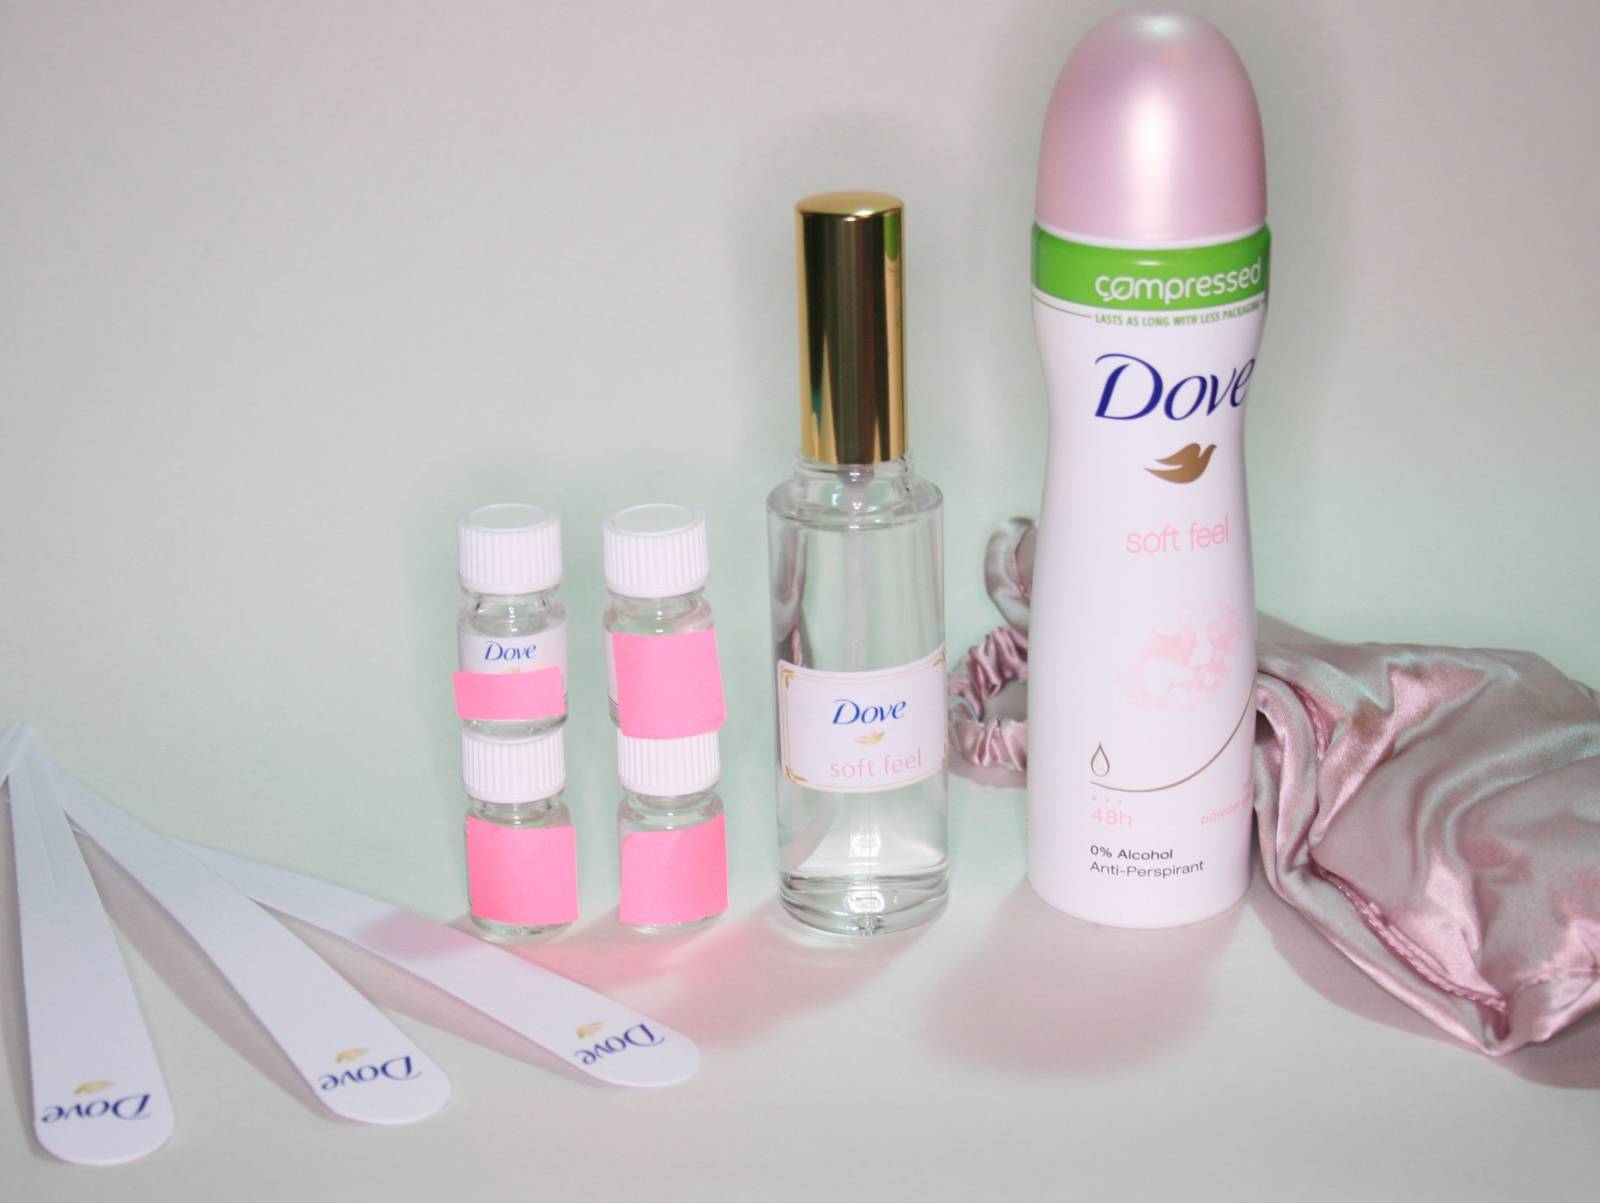 ader radiator Spreek luid Dove Soft Feel Review - the Psychology of Scent